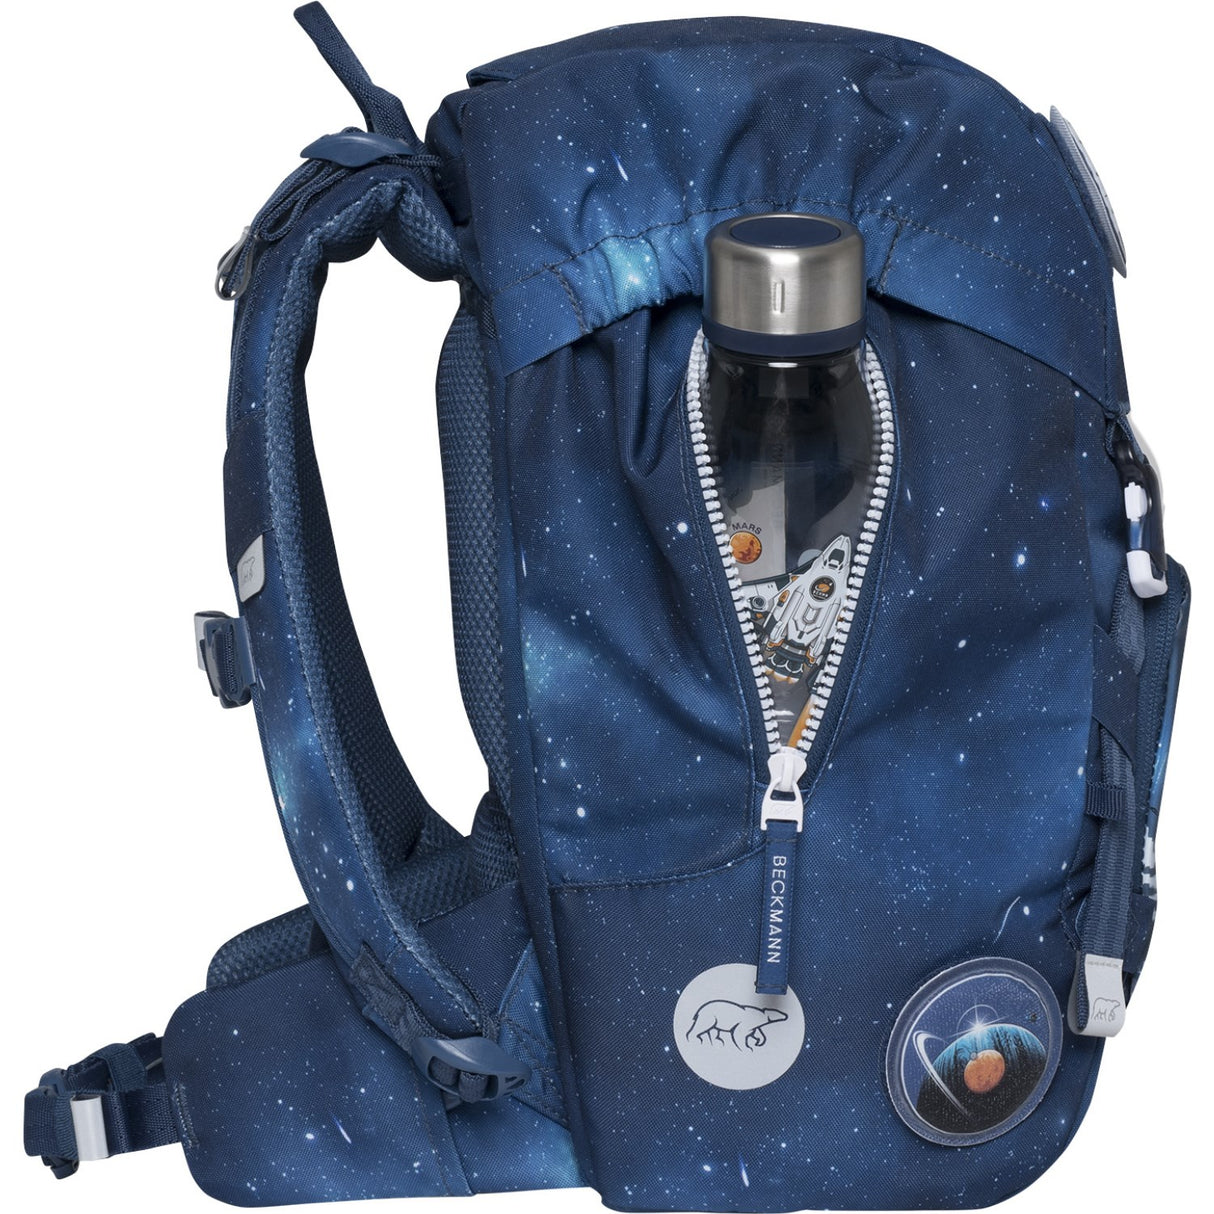 Beckmann Classic 22 Space Mission 5